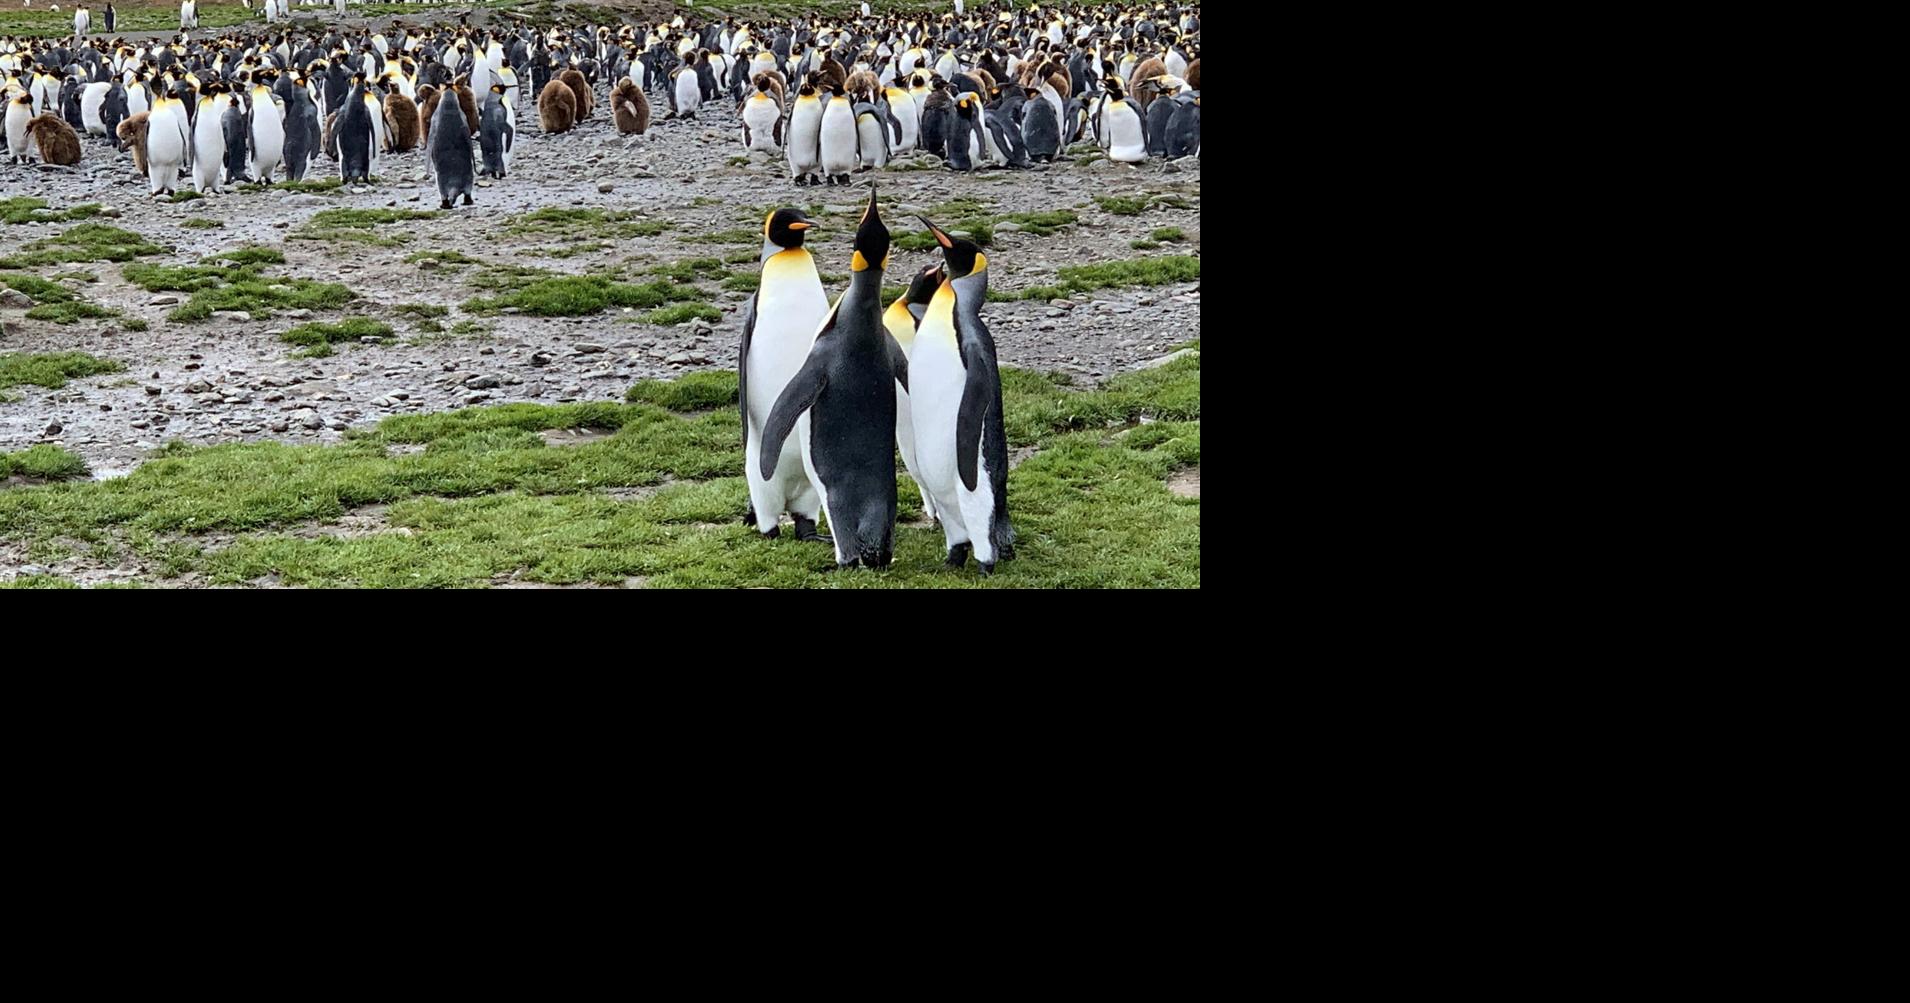 Travel: Penguins and elephant seals star on an expedition to